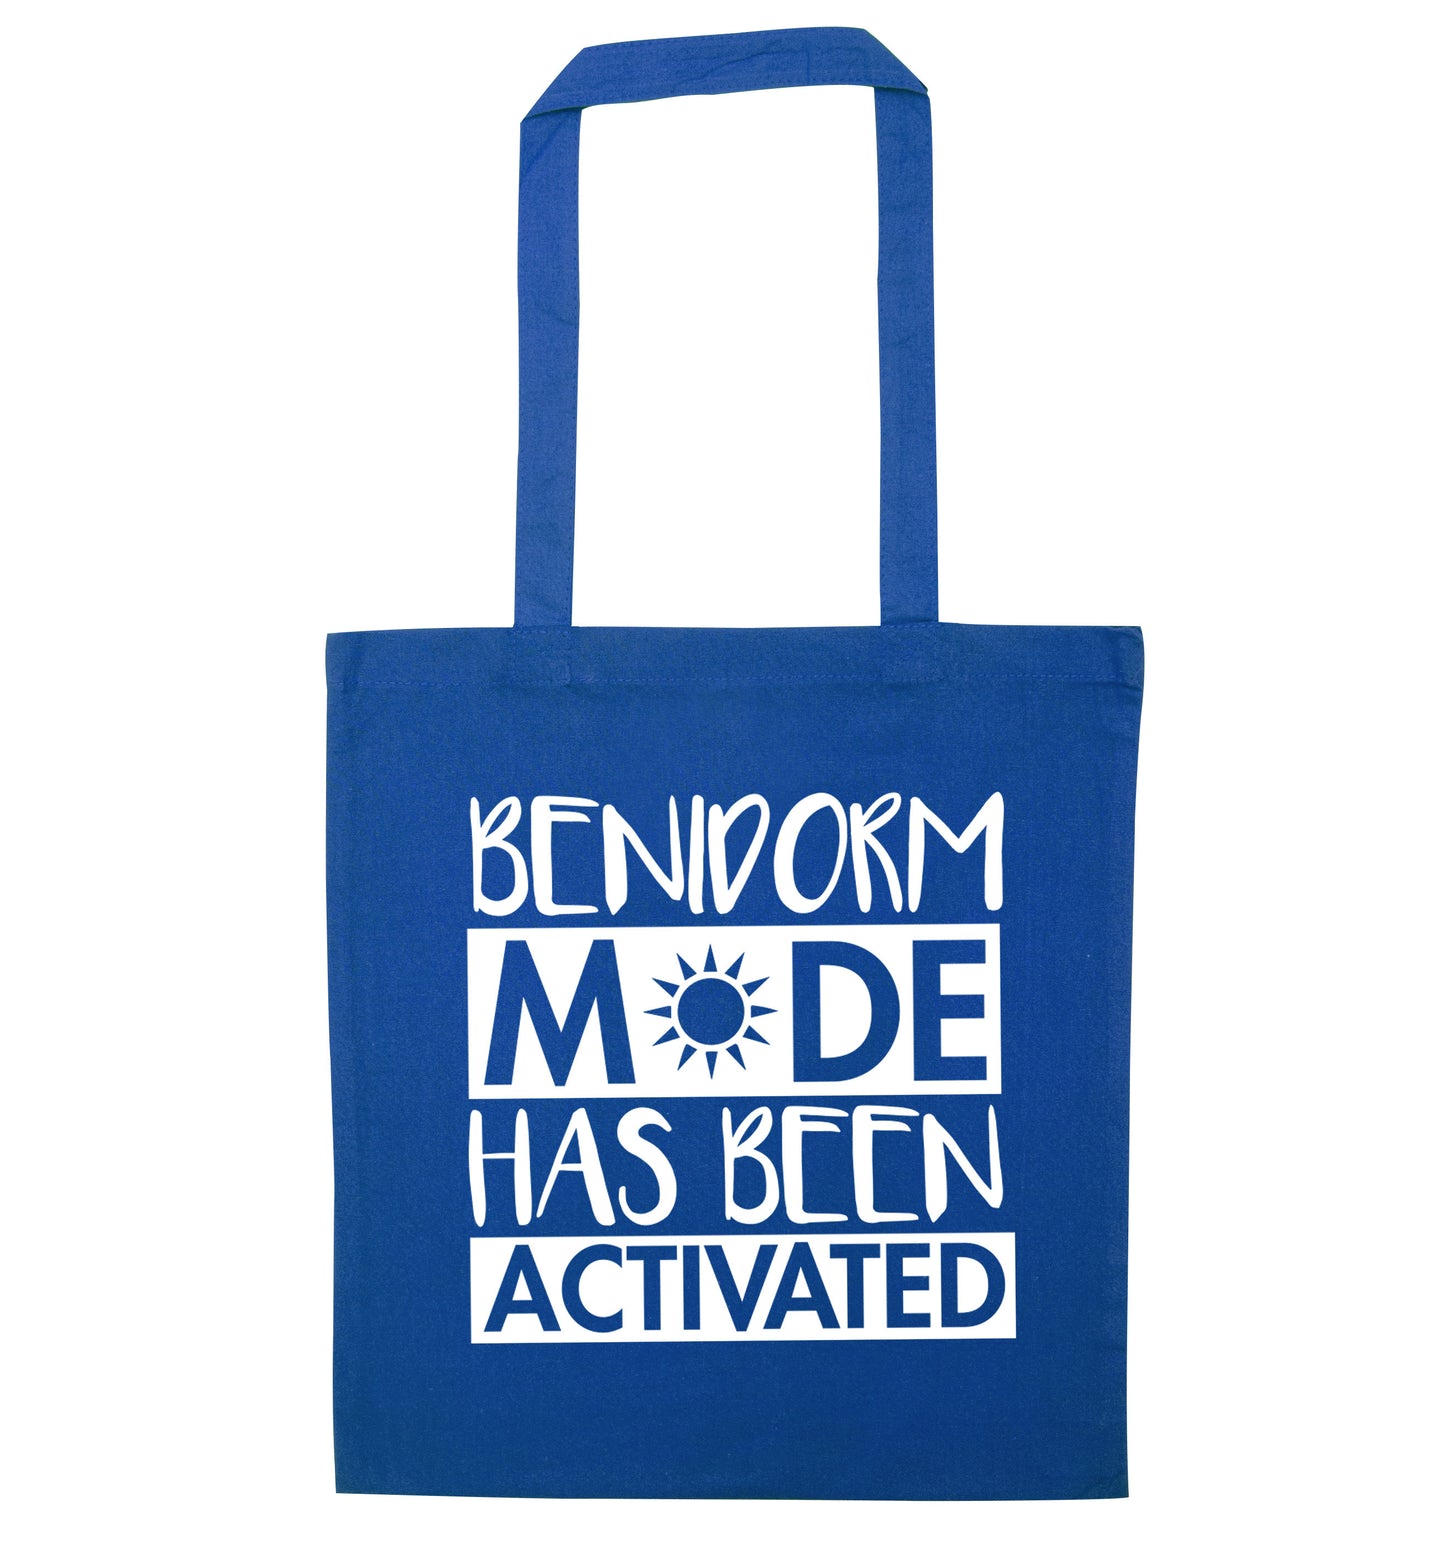 Benidorm mode has been activated blue tote bag